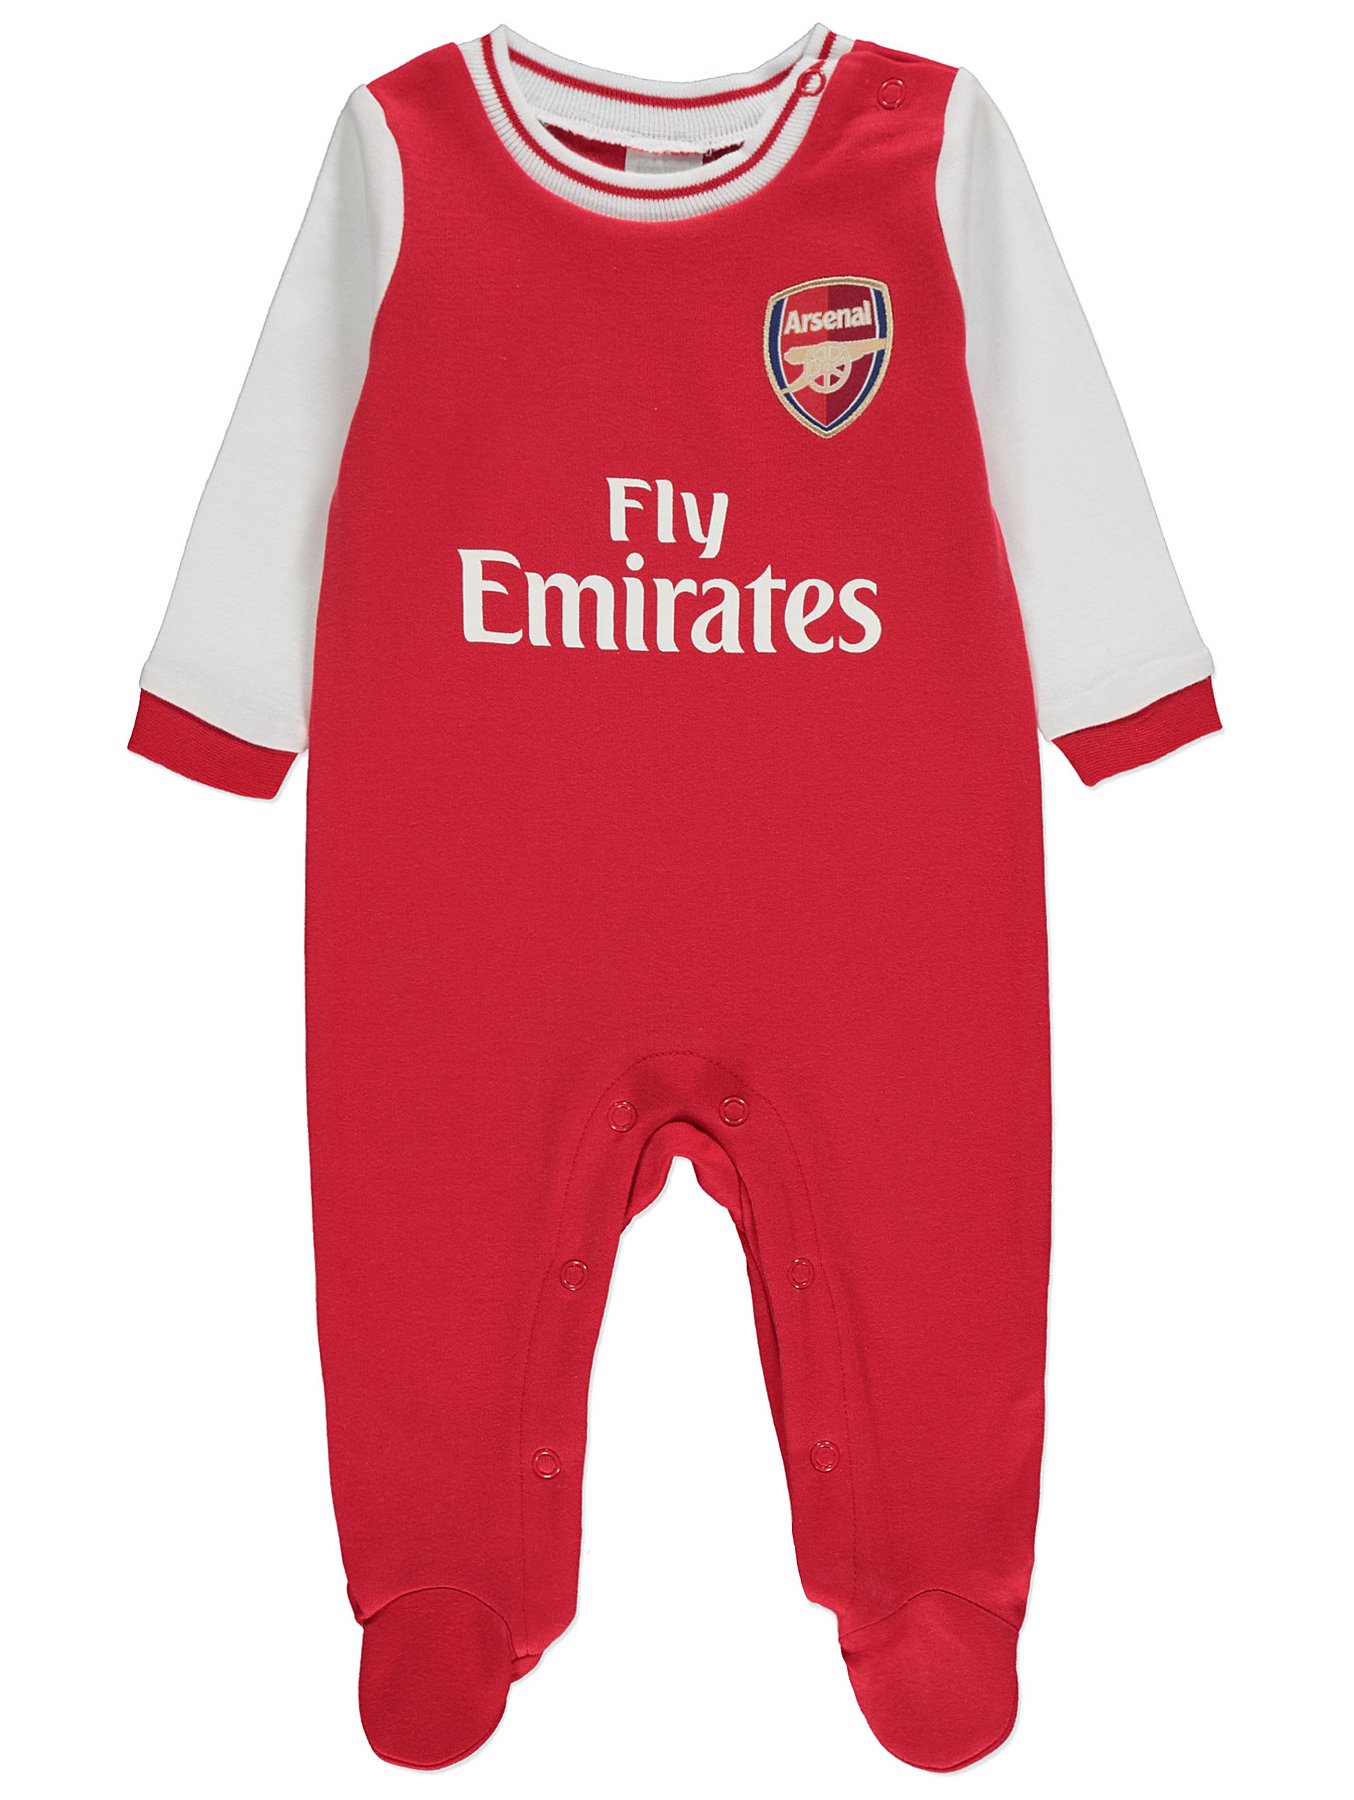 Arsenal FC Official Football Gift Home Kit Baby Sleepsuit Red White 0-3 Months